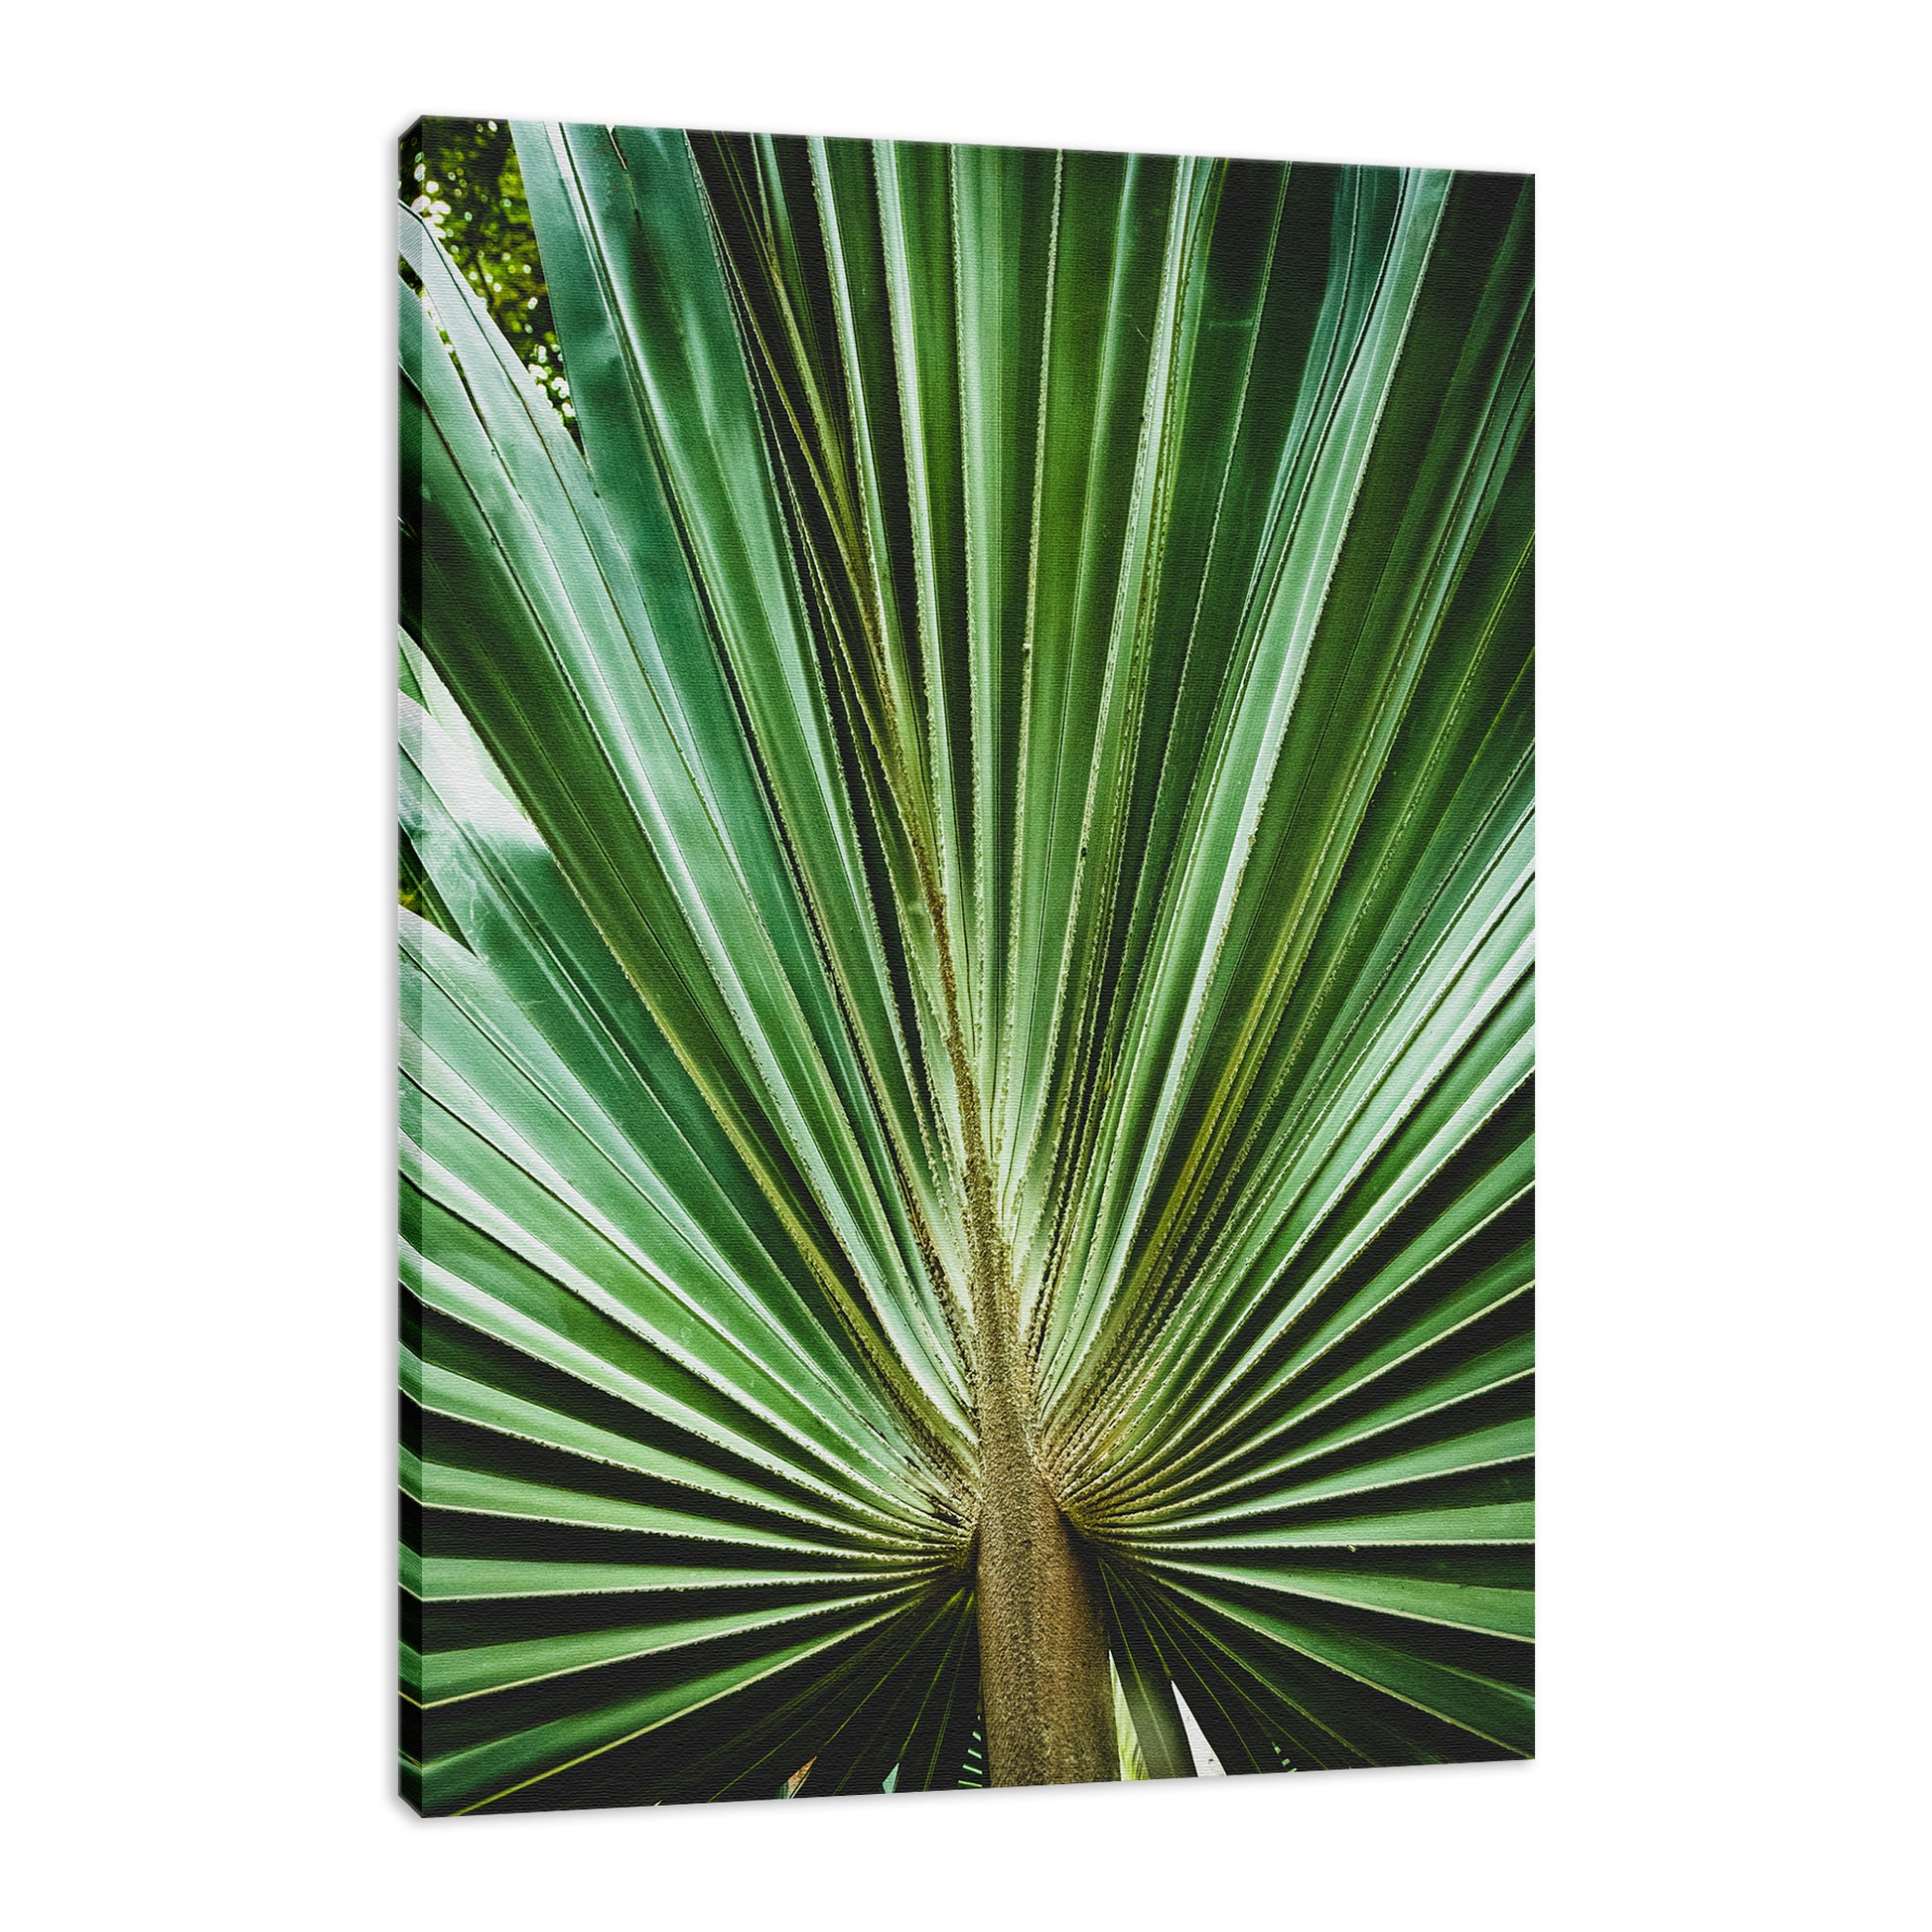 Palm Tree Leaves Wall Decor: Aged & Colorized Wide Palm Leaves 2 Nature / Botanical Photo Fine Art Canvas Wall Art Prints  - PIPAFINEART